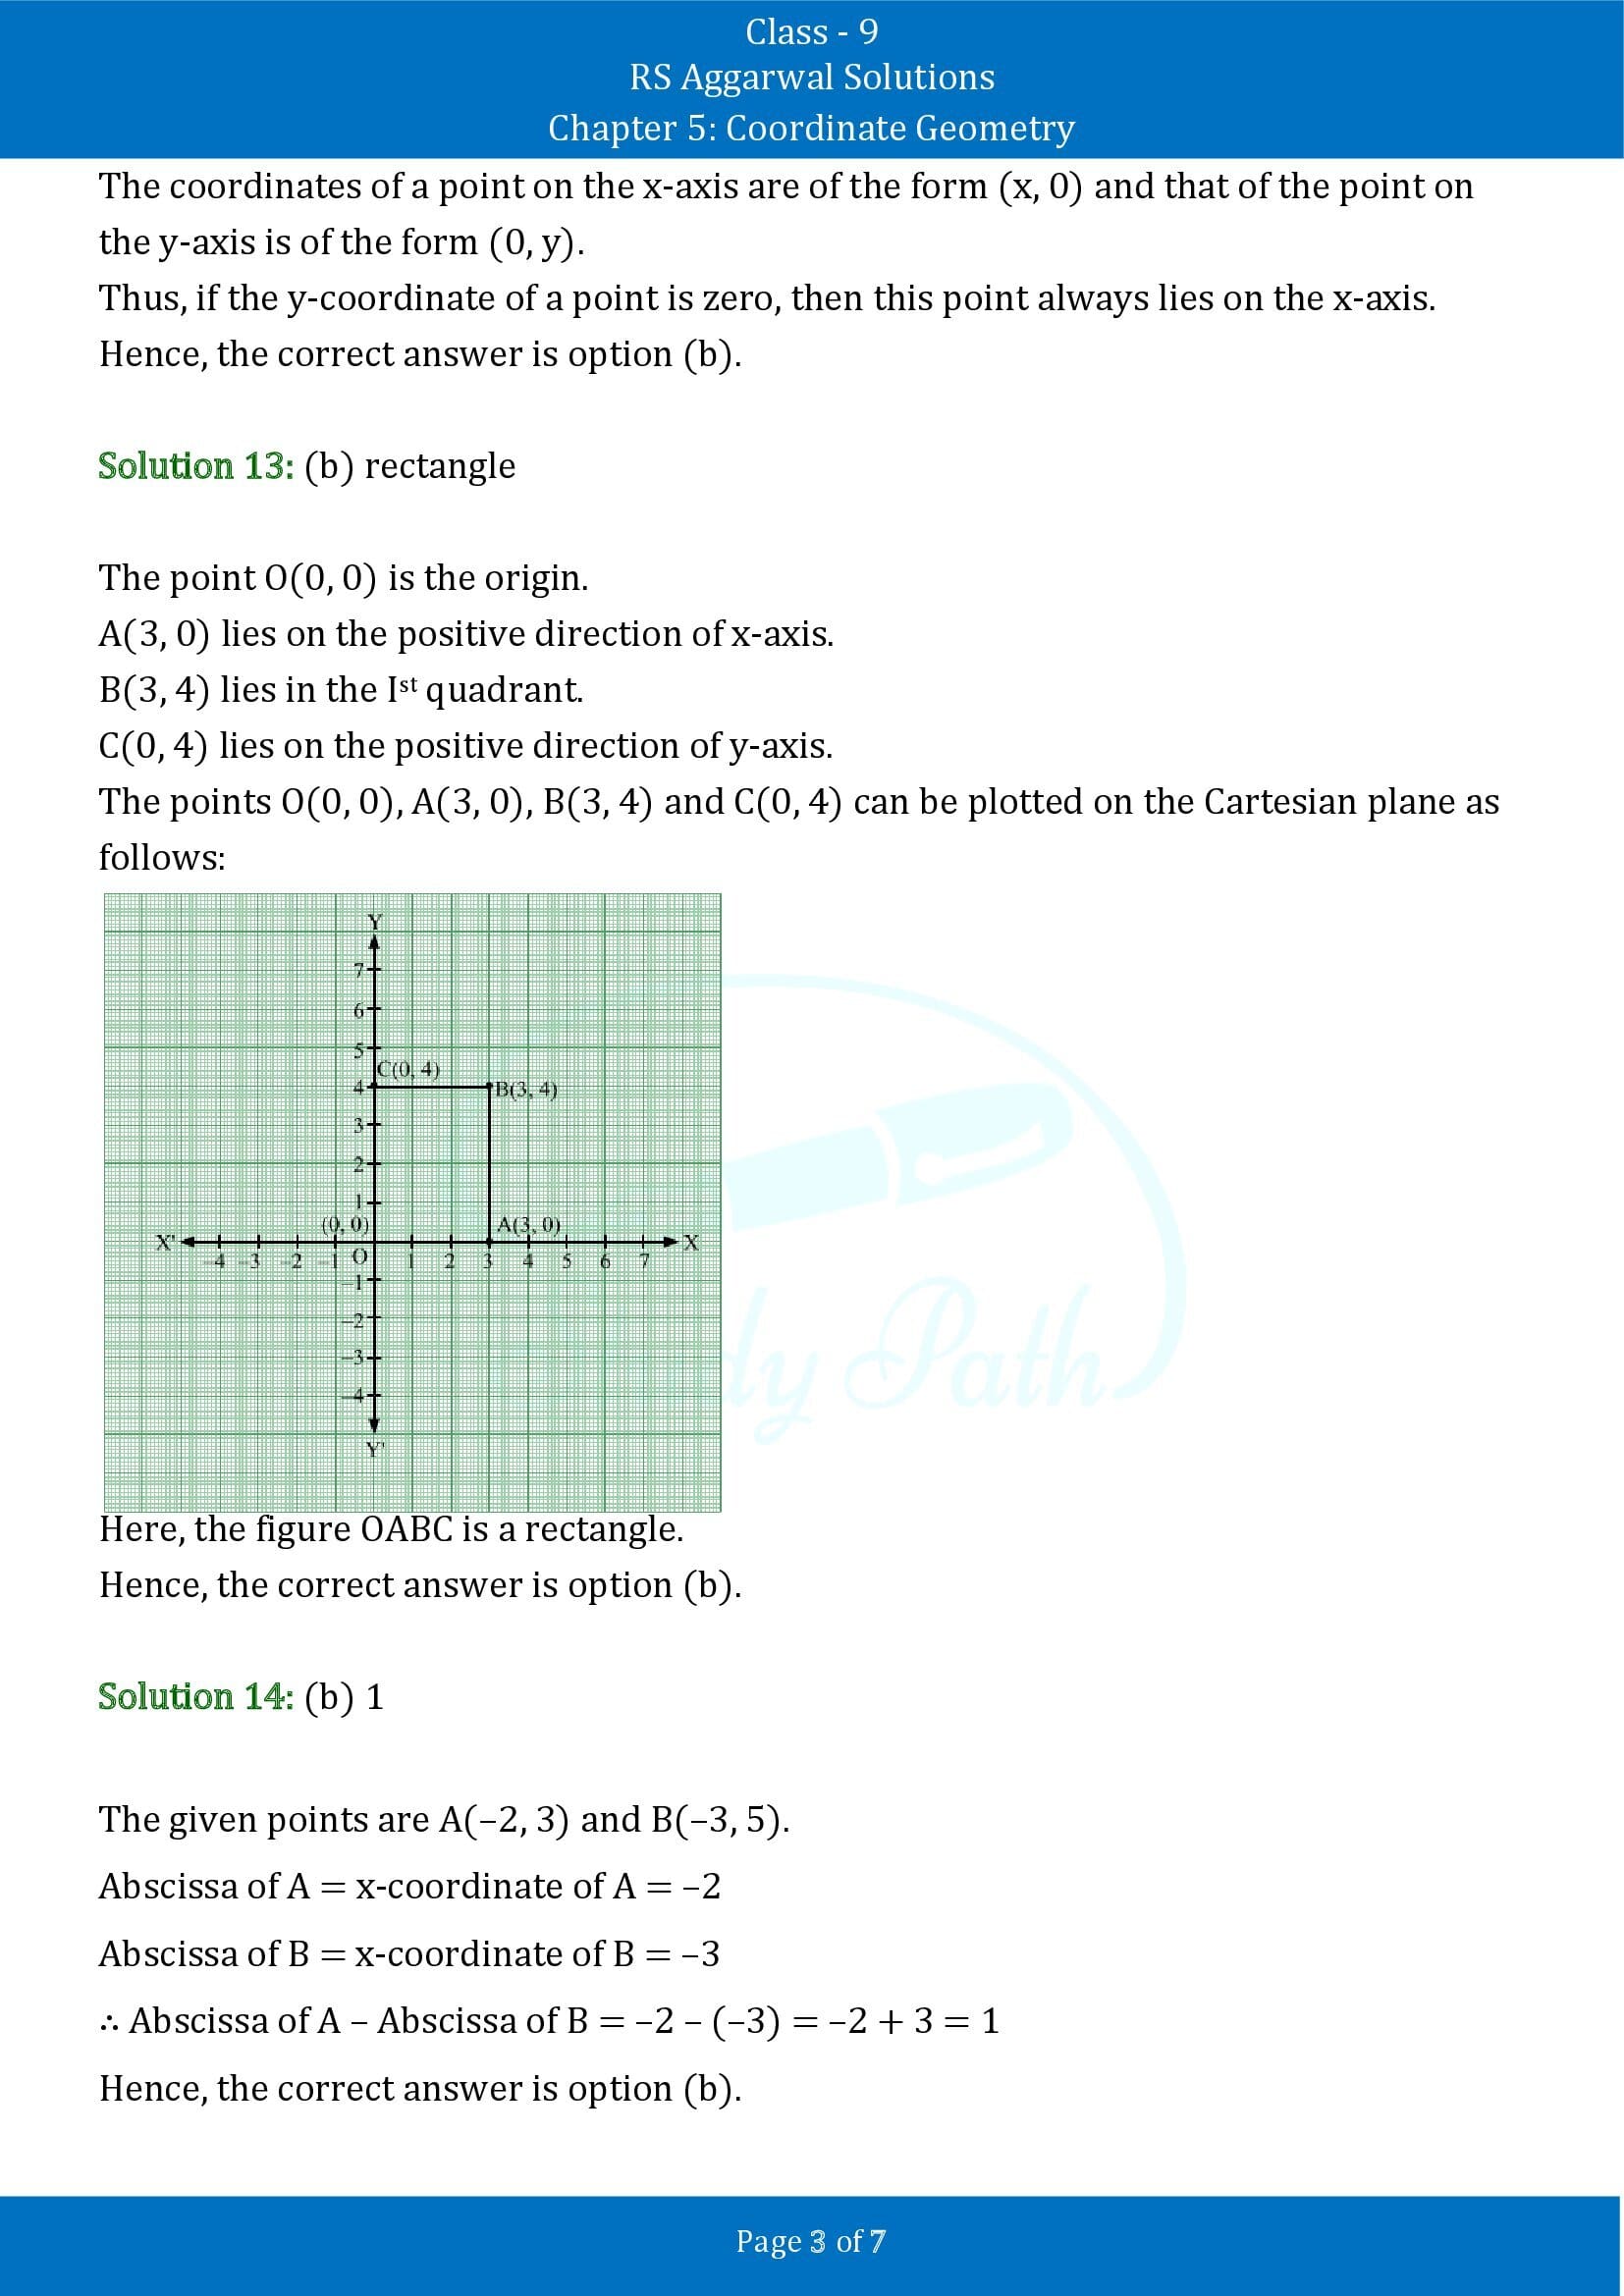 RS Aggarwal Solutions Class 9 Chapter 5 Coordinate Geometry Multiple Choice Questions MCQs 00003